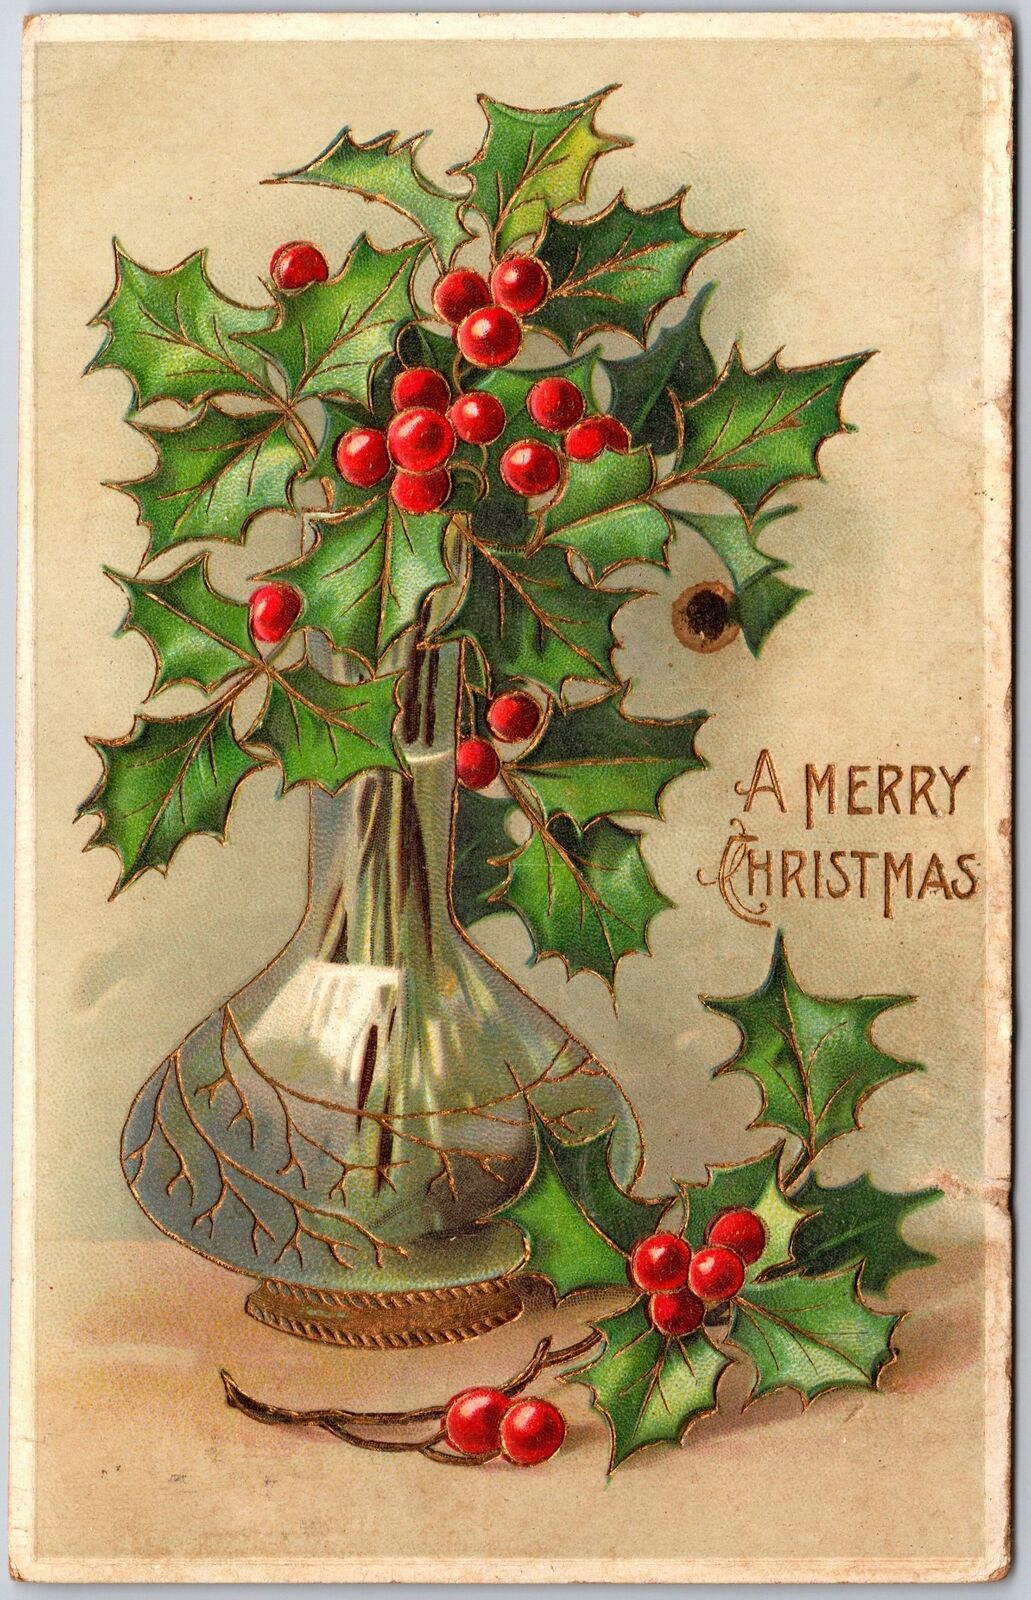 1909 A Merry Christmas Holy Leaf Cherry In Silver Vase Greetings Posted Postcard